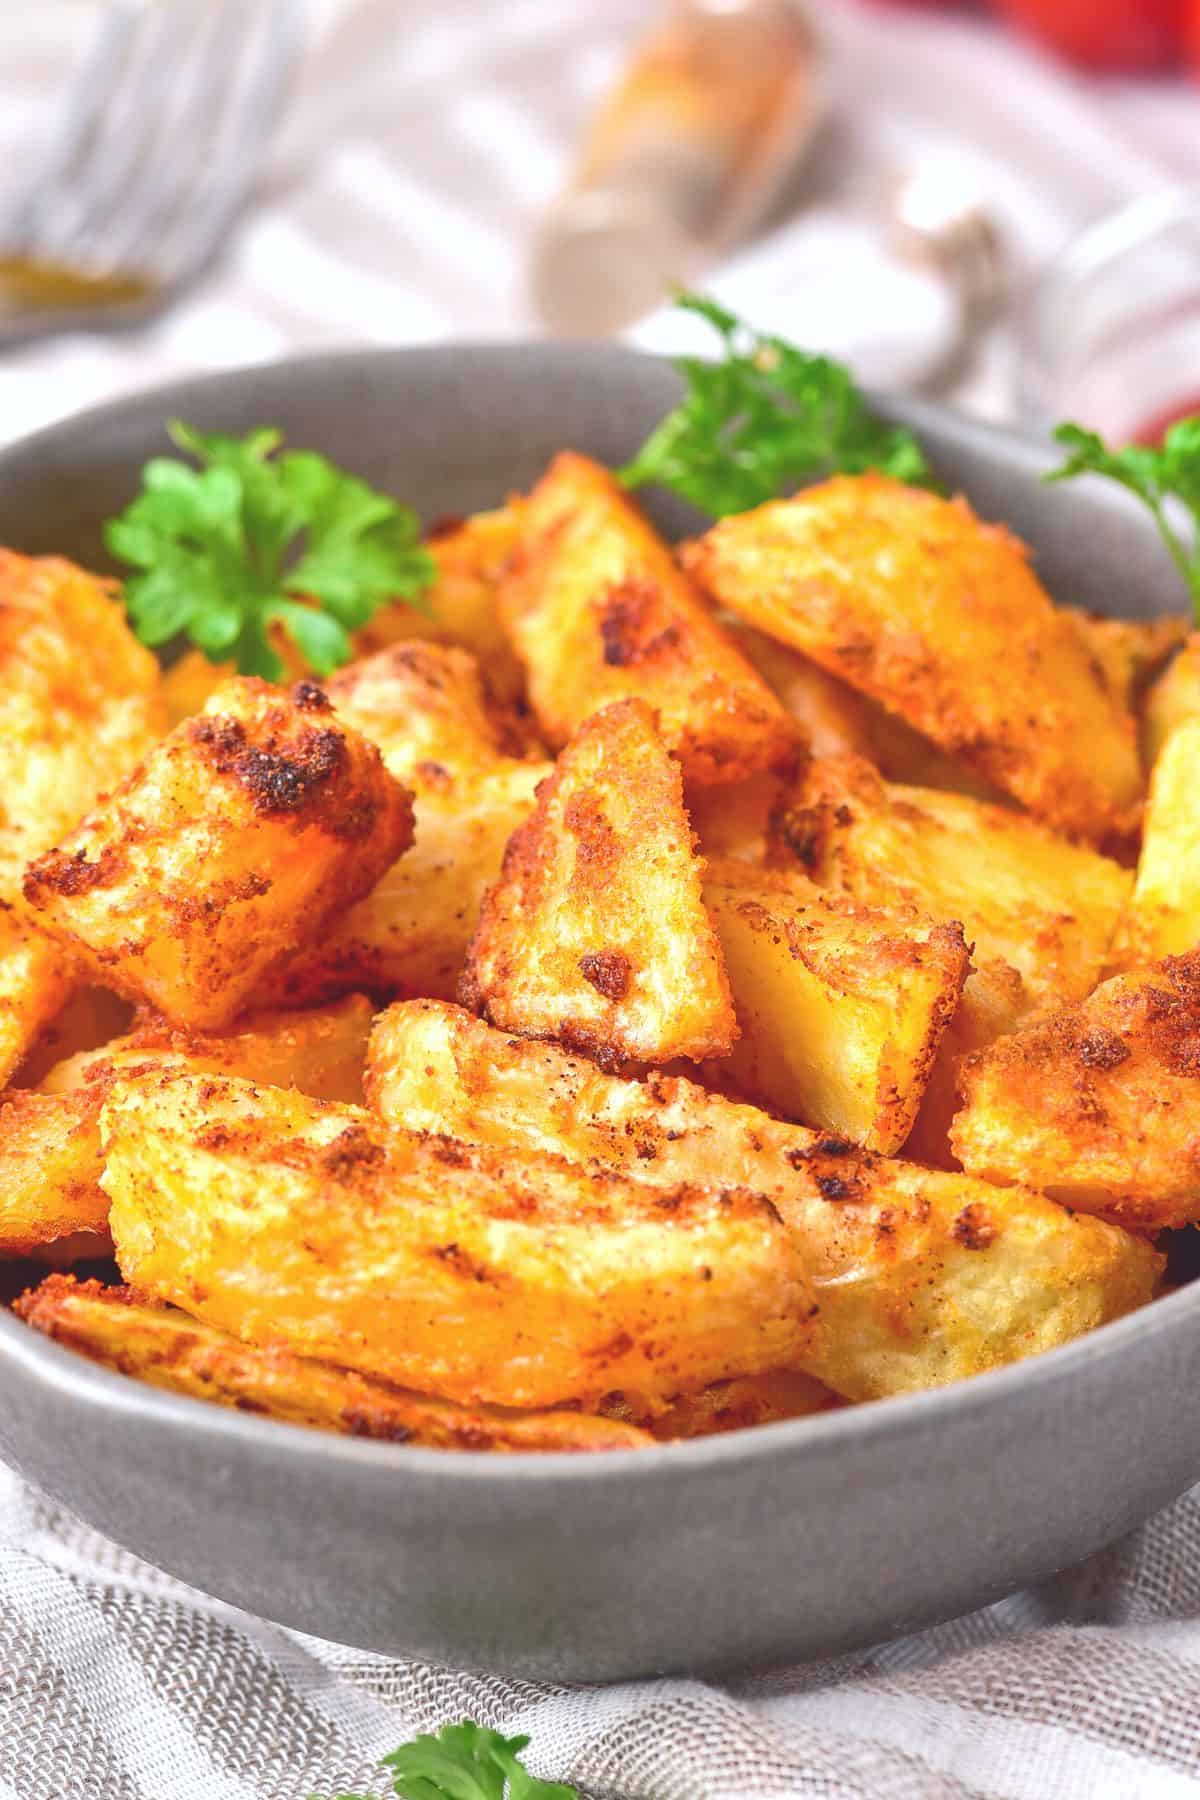 A bowl of crispy air fried potato wedges garnished with parsely.